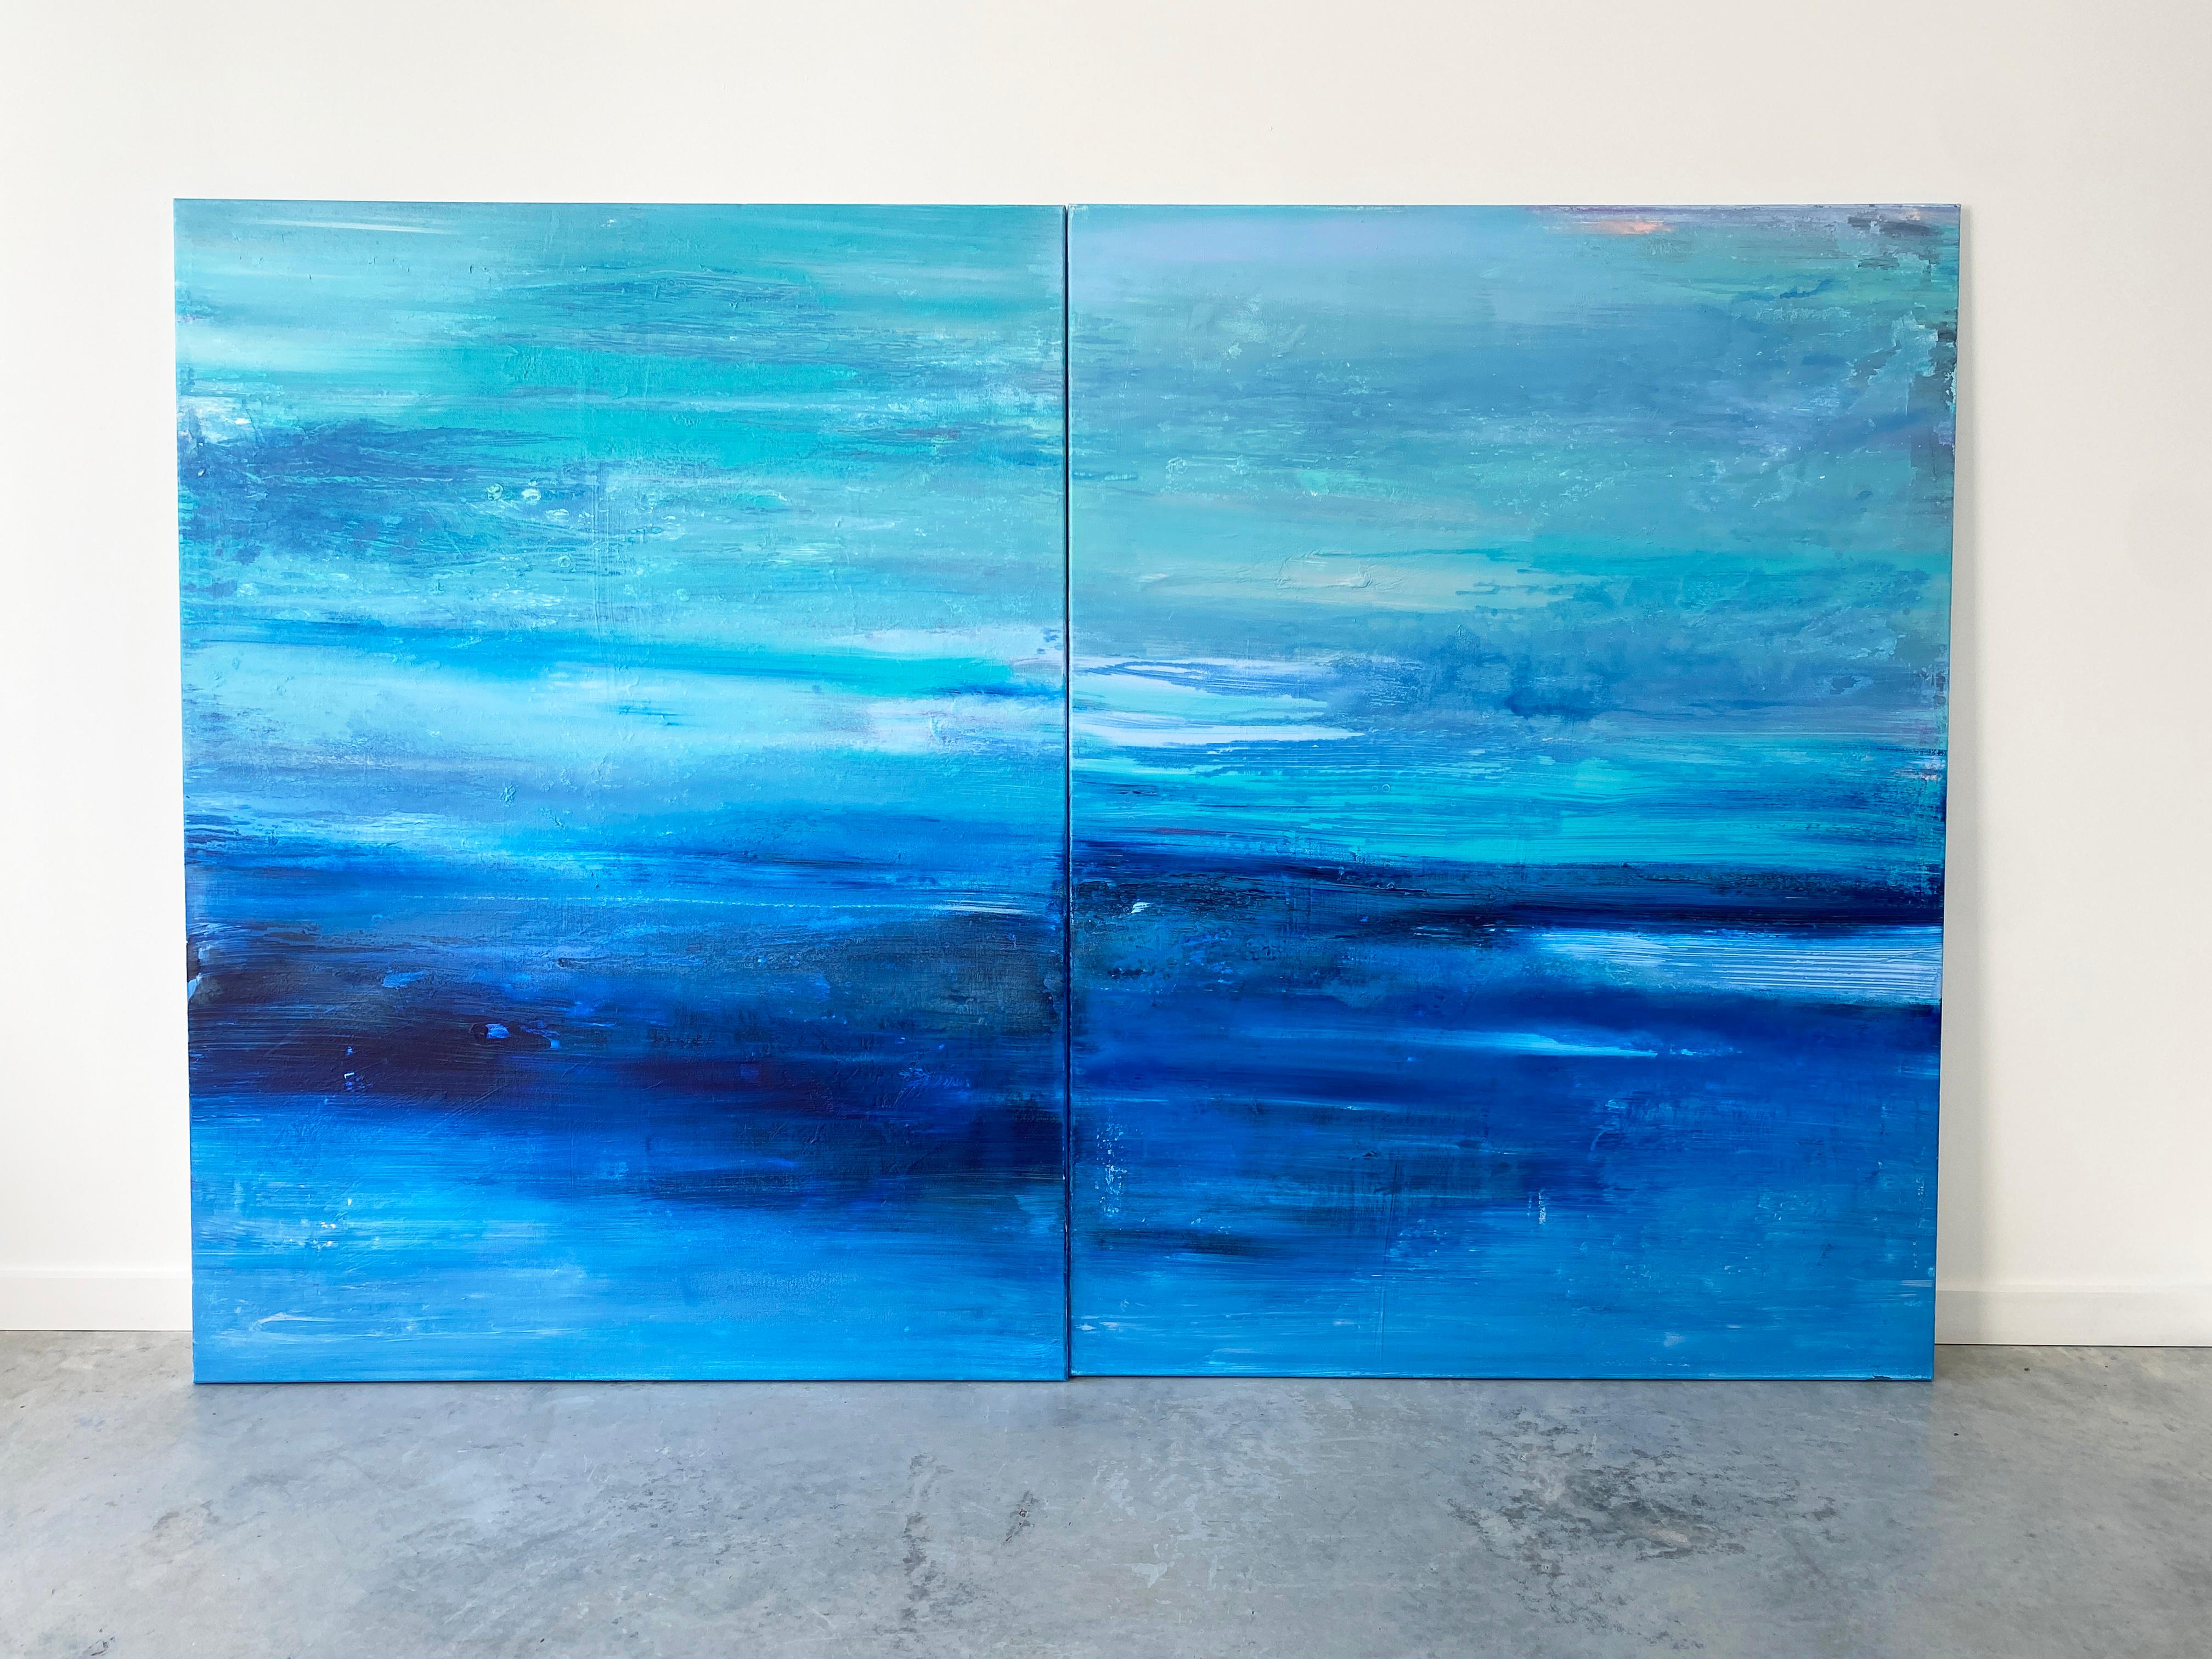 While lighter hues offer calmness and tranquility, pops of saturated blue tones deliver drama and energy, the perfect combination to fill your special space. Light and peace will fill you day, discover something new each time you look at this work.